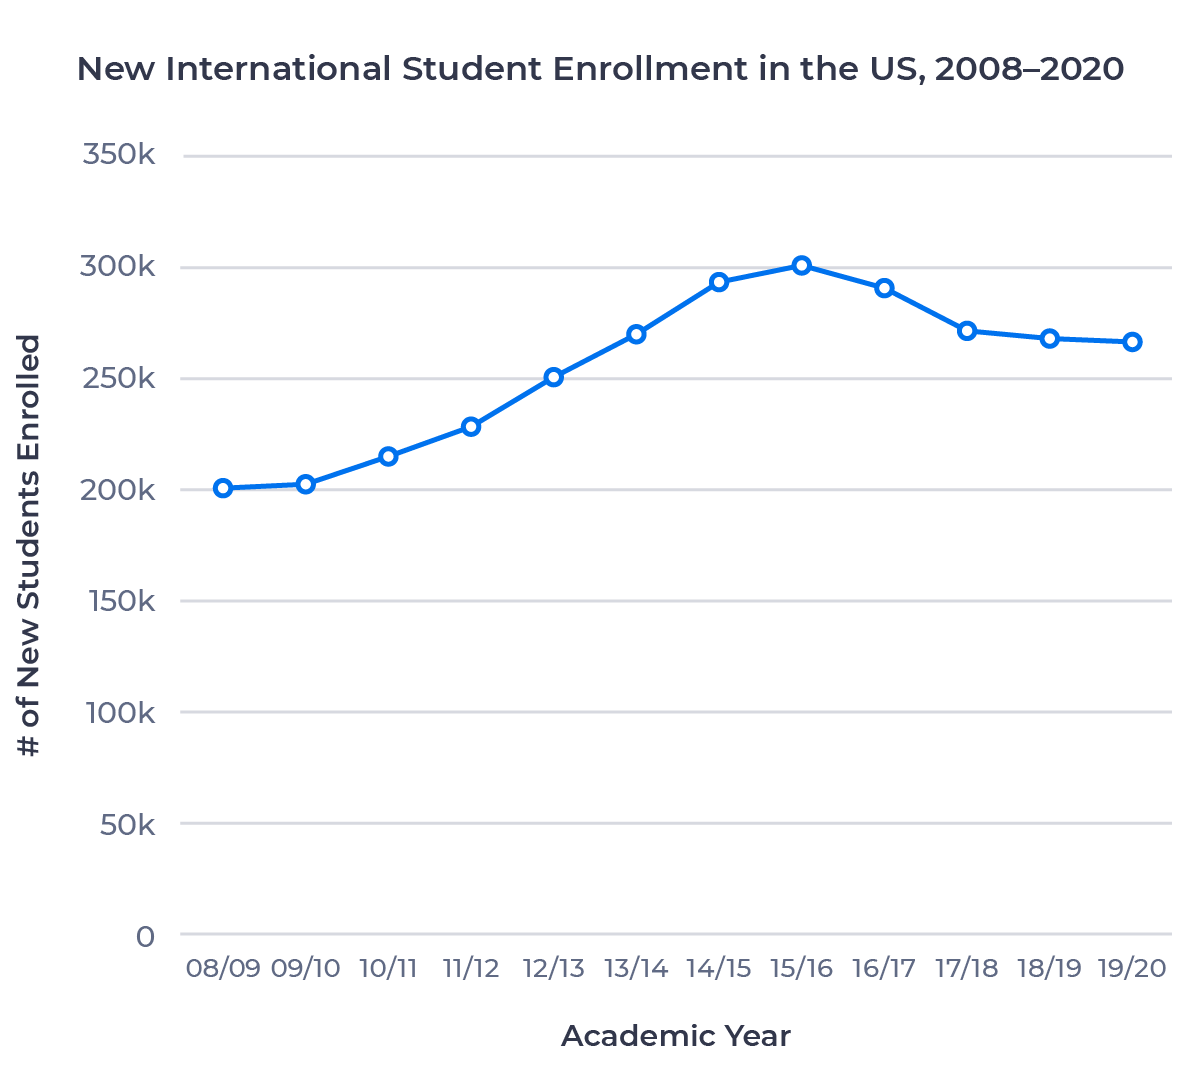 Line chart showing total new international student enrollment in the US from the 08/09 to 19/20 academic years. Enrollment grew between 08/09 and 15/16 before declining over the following four years.